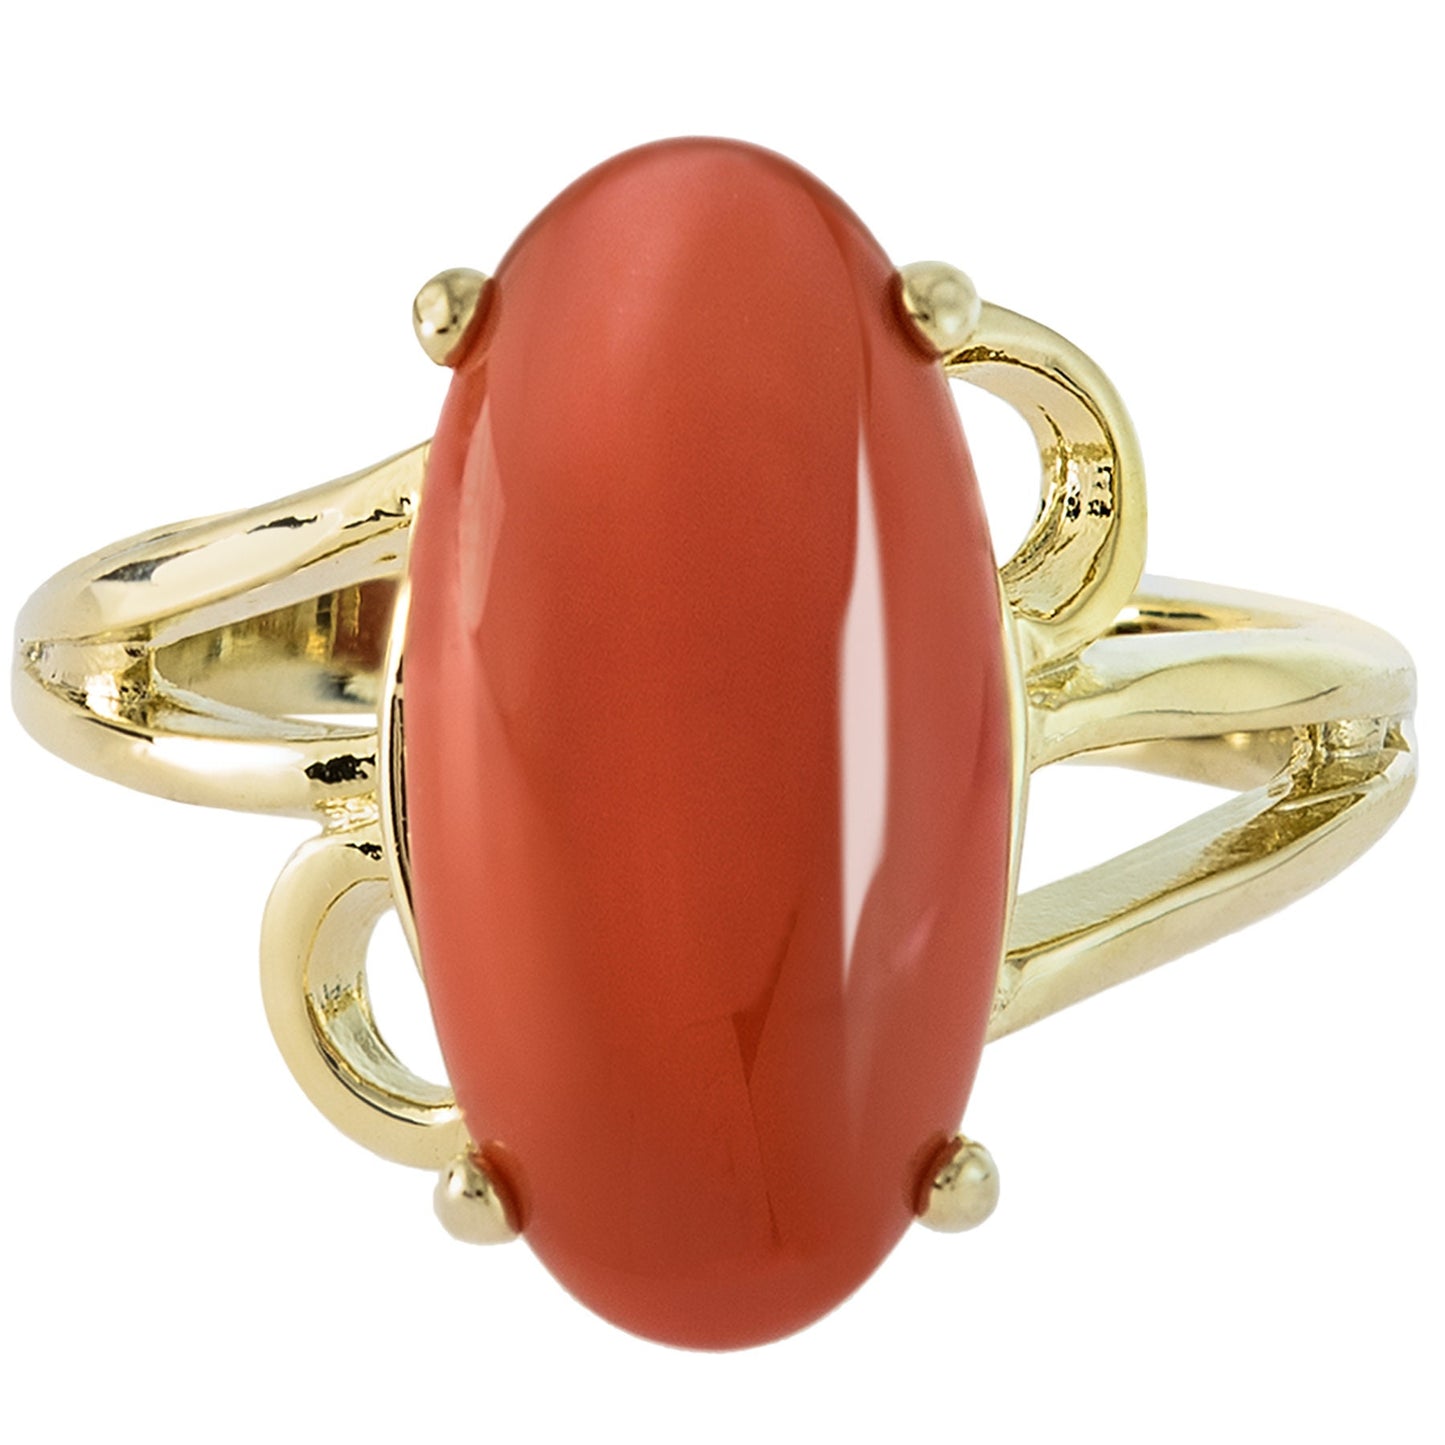 Vintage Ring 1970s Imitation Coral 18k Gold Cocktail Ring #R1846 Antique Rings - Limited Stock - Never Worn